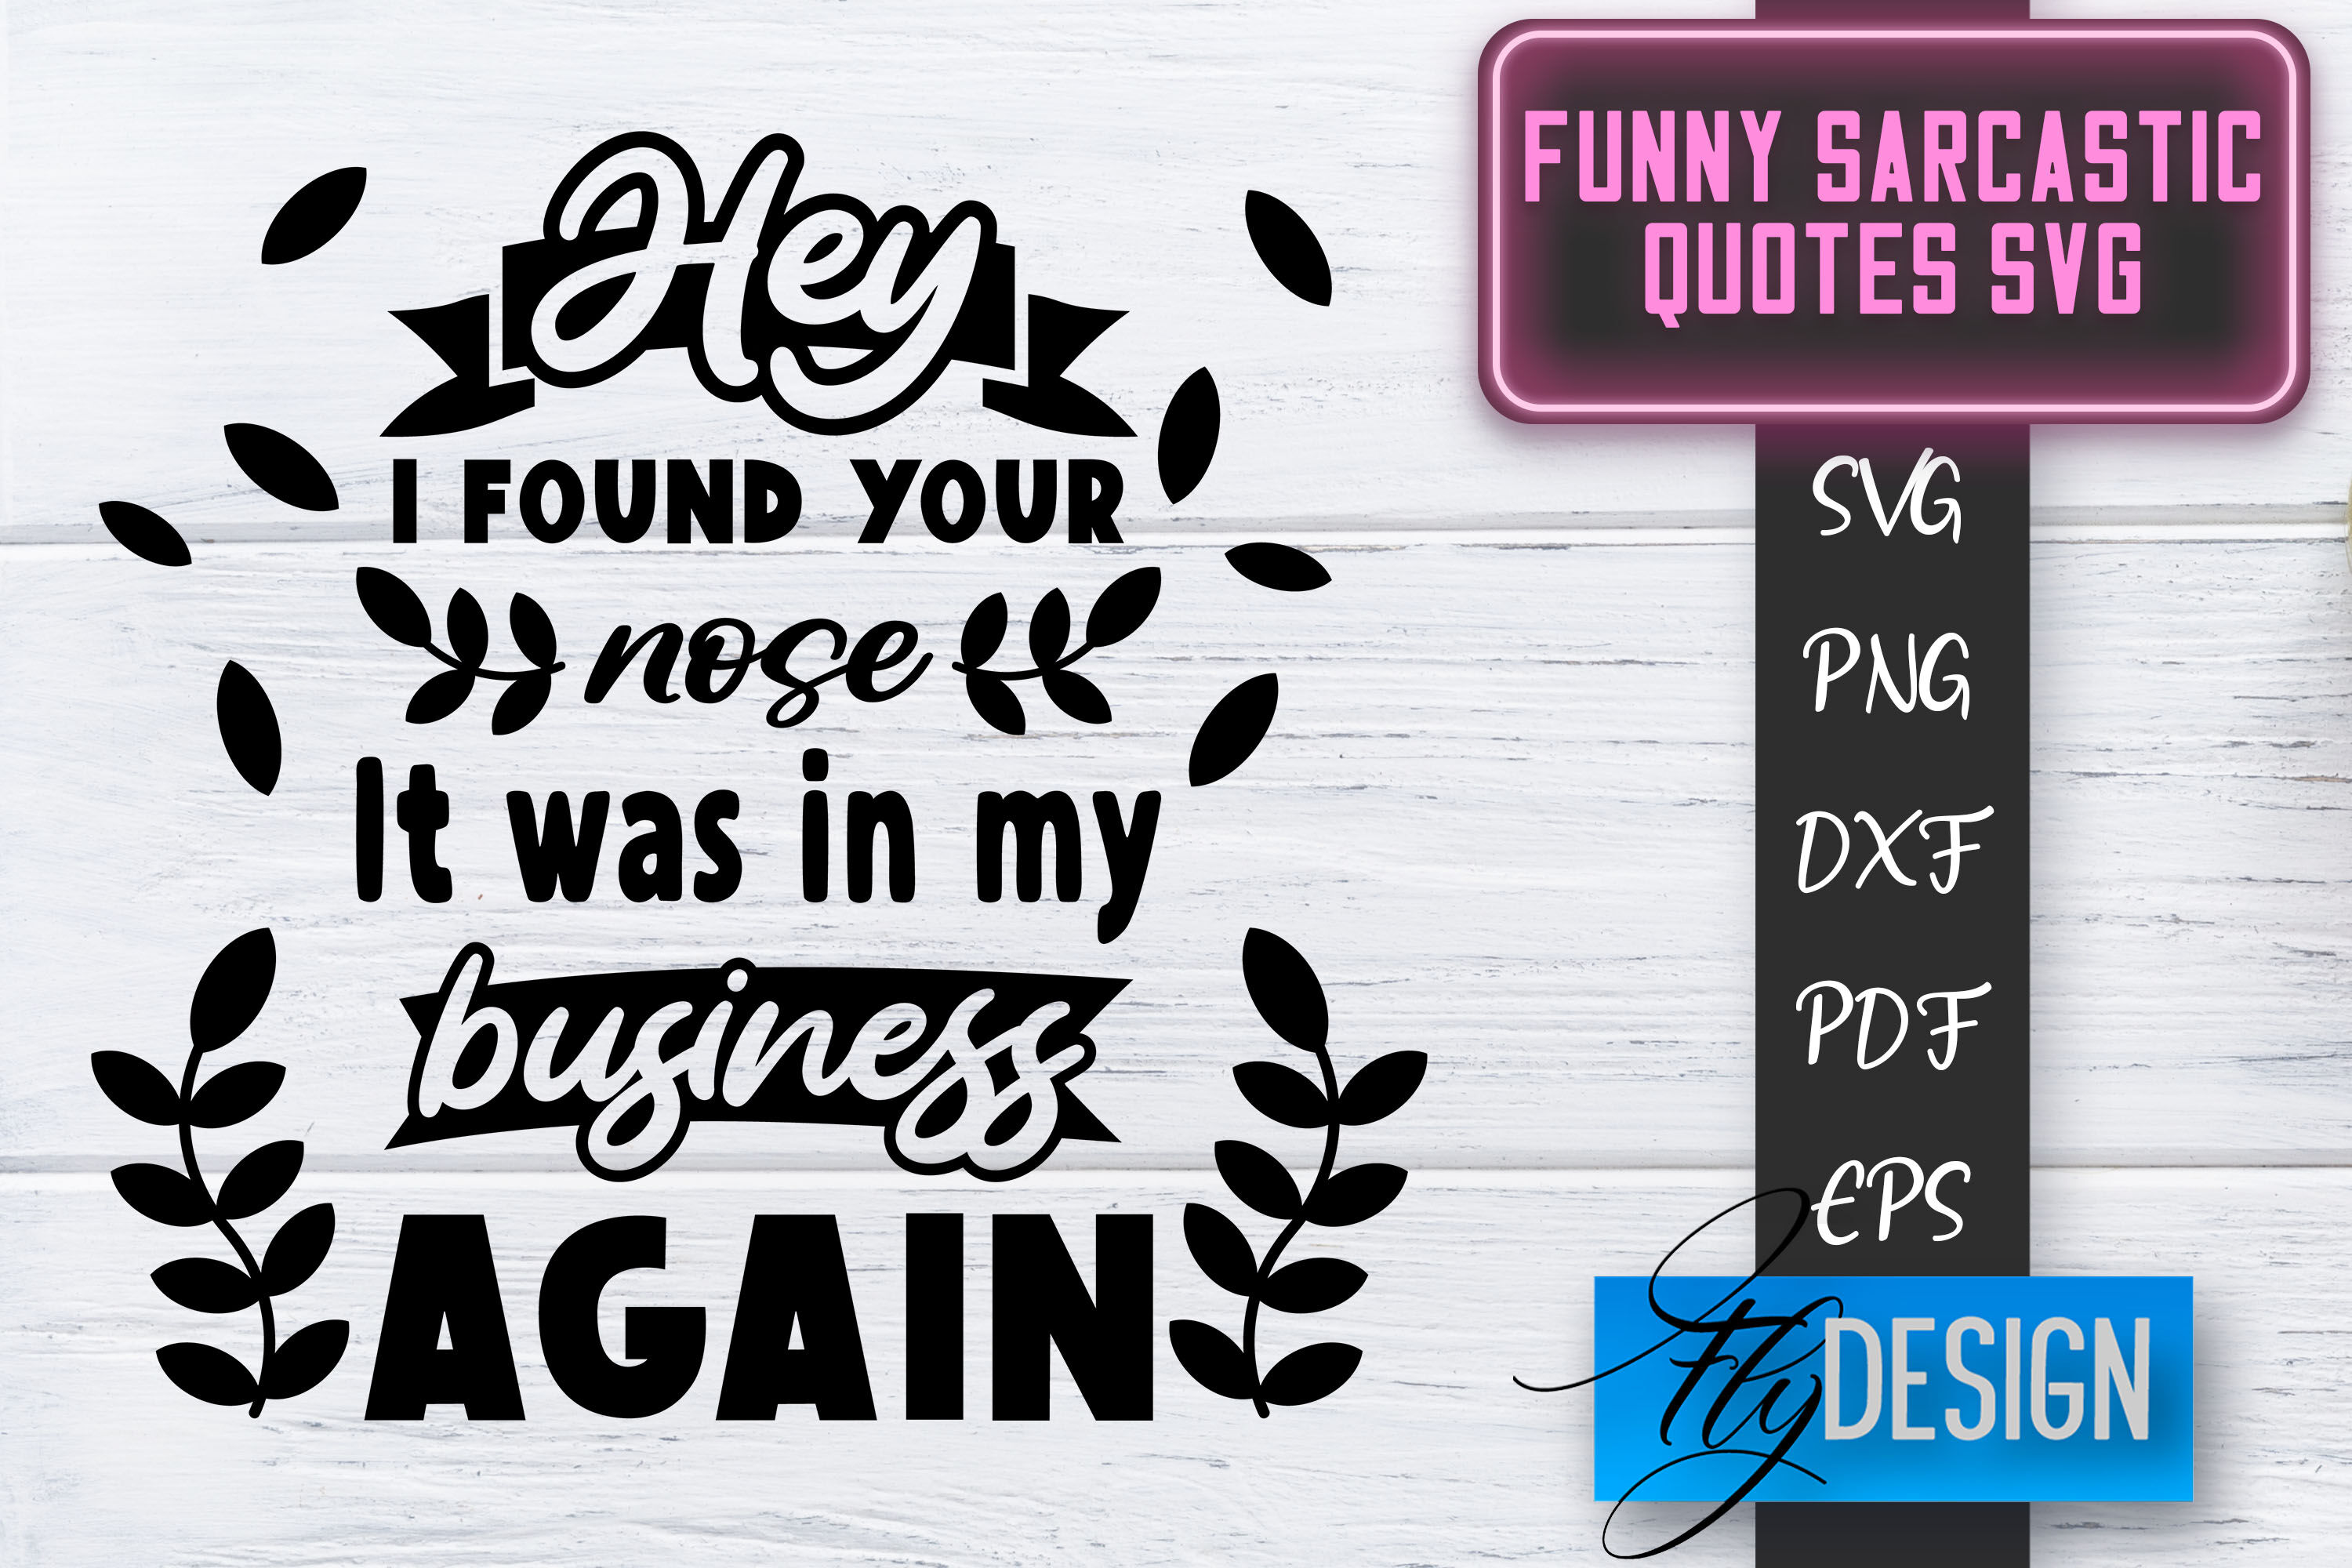 Funny Sarcastic SVG | Sarcastic Quotes SVG | Sarcastic Sayings SVG By Fly  Design | TheHungryJPEG